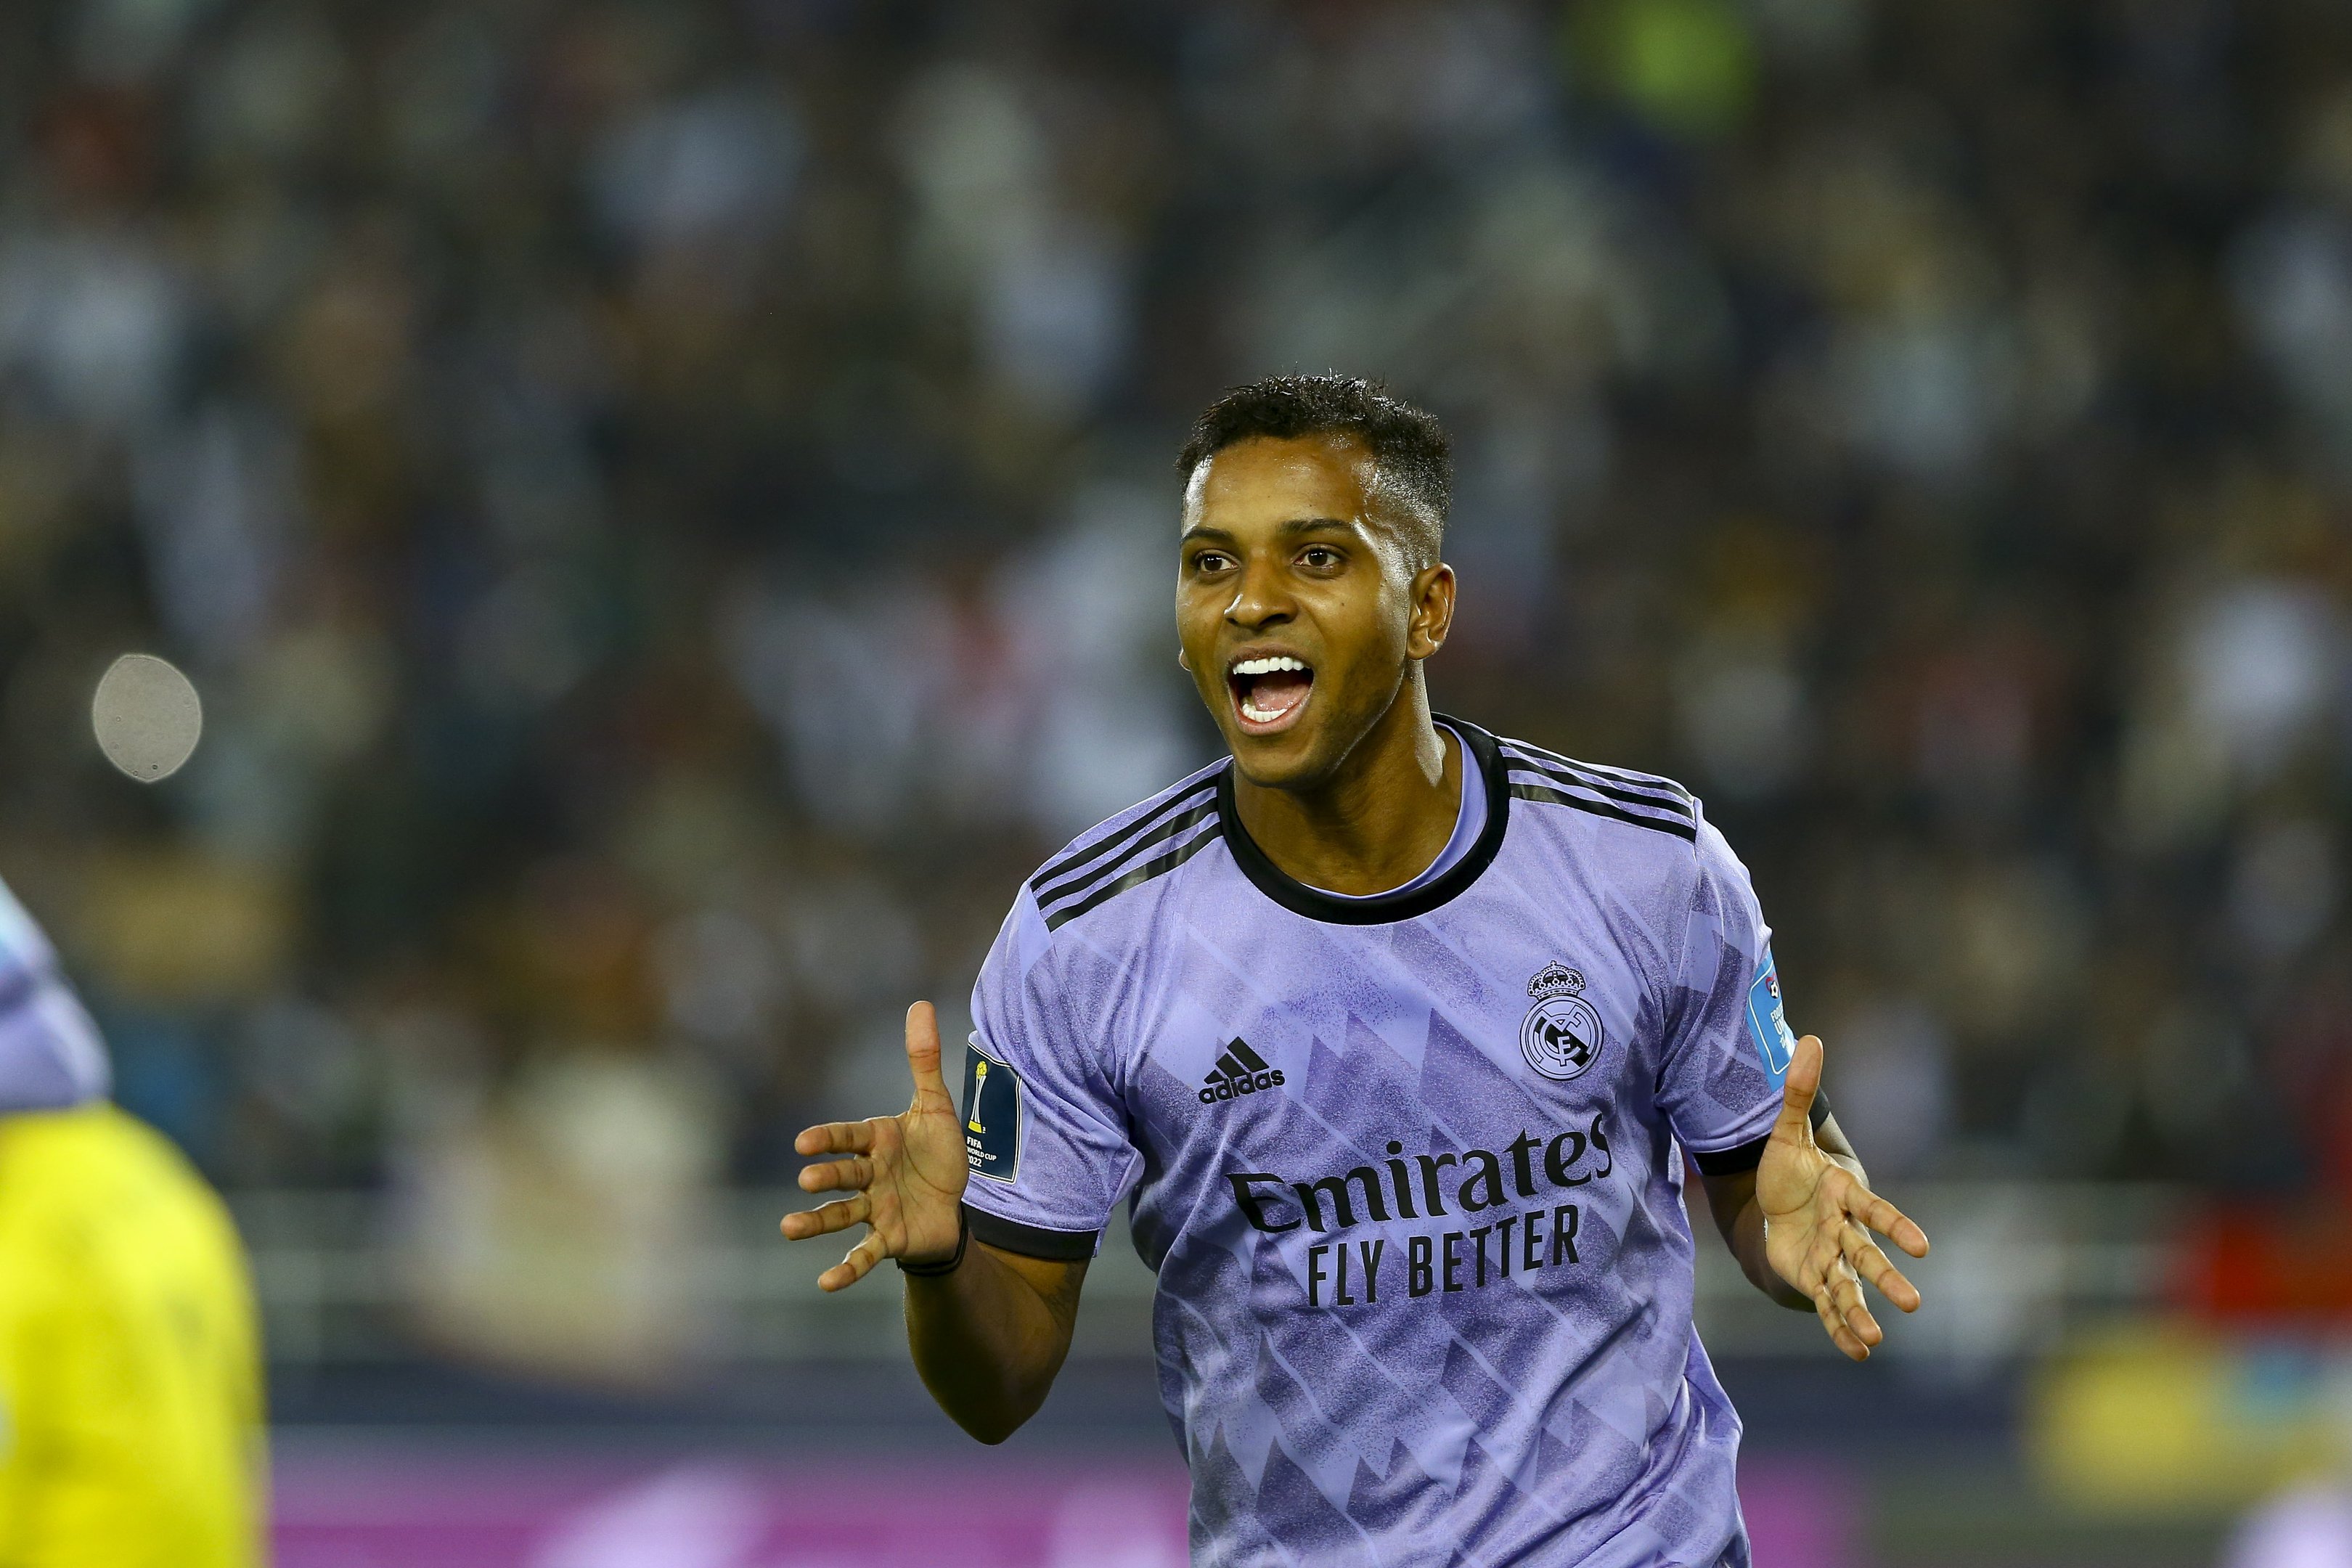 RABAT, MOROCCO - FEBRUARY 08: Rodrygo of Real Madrid celebrates after scoring his team's third goal during the FIFA Club World Cup Morocco 2022 Semi Final match between Al Ahly and Real Madrid CF at Prince Moulay Abdellah on February 8, 2023 in Rabat, Morocco. (Photo by Mohammad Karamali/DeFodi Images via Getty Images)